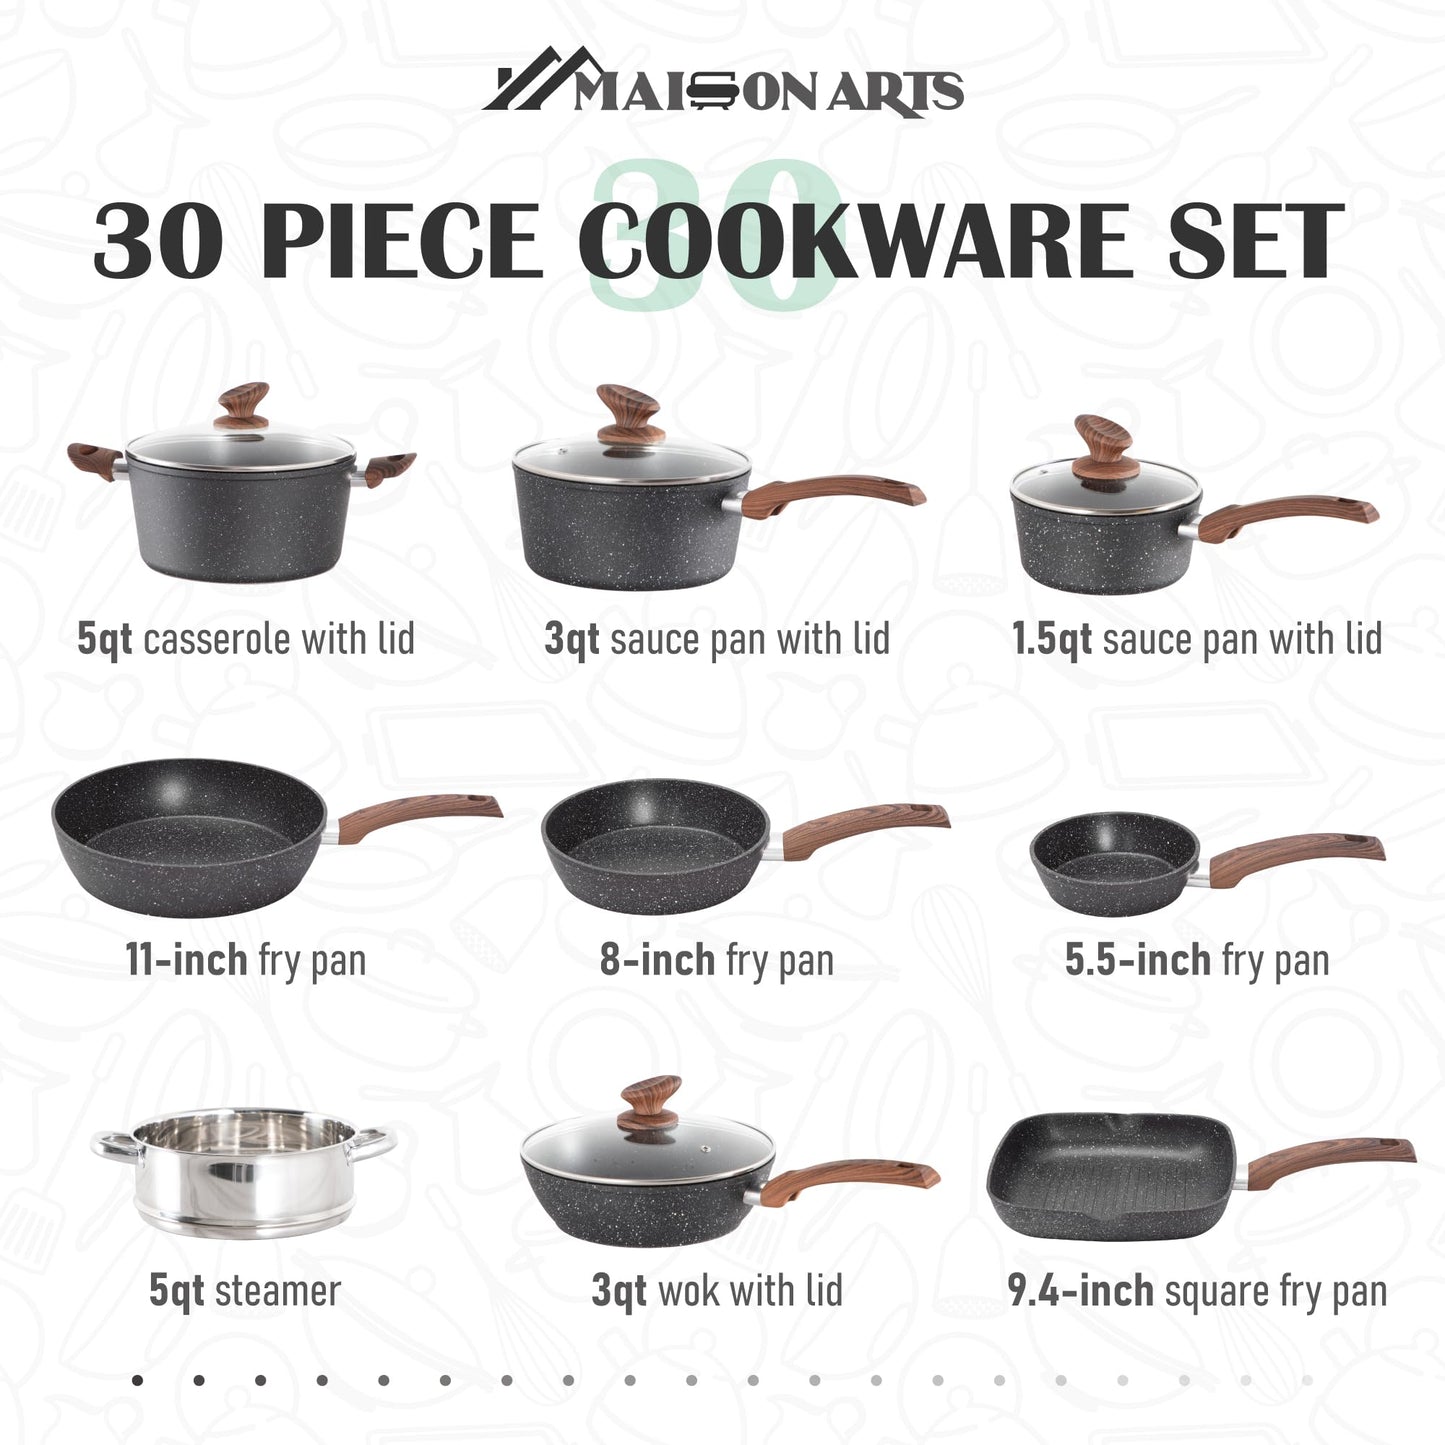 MAISON ARTS 30-Piece Pots and Pans Set - Kitchen Cookware & Bakeware Sets with Nonstick Granite Coating, Baking Pans and Frying Pans set